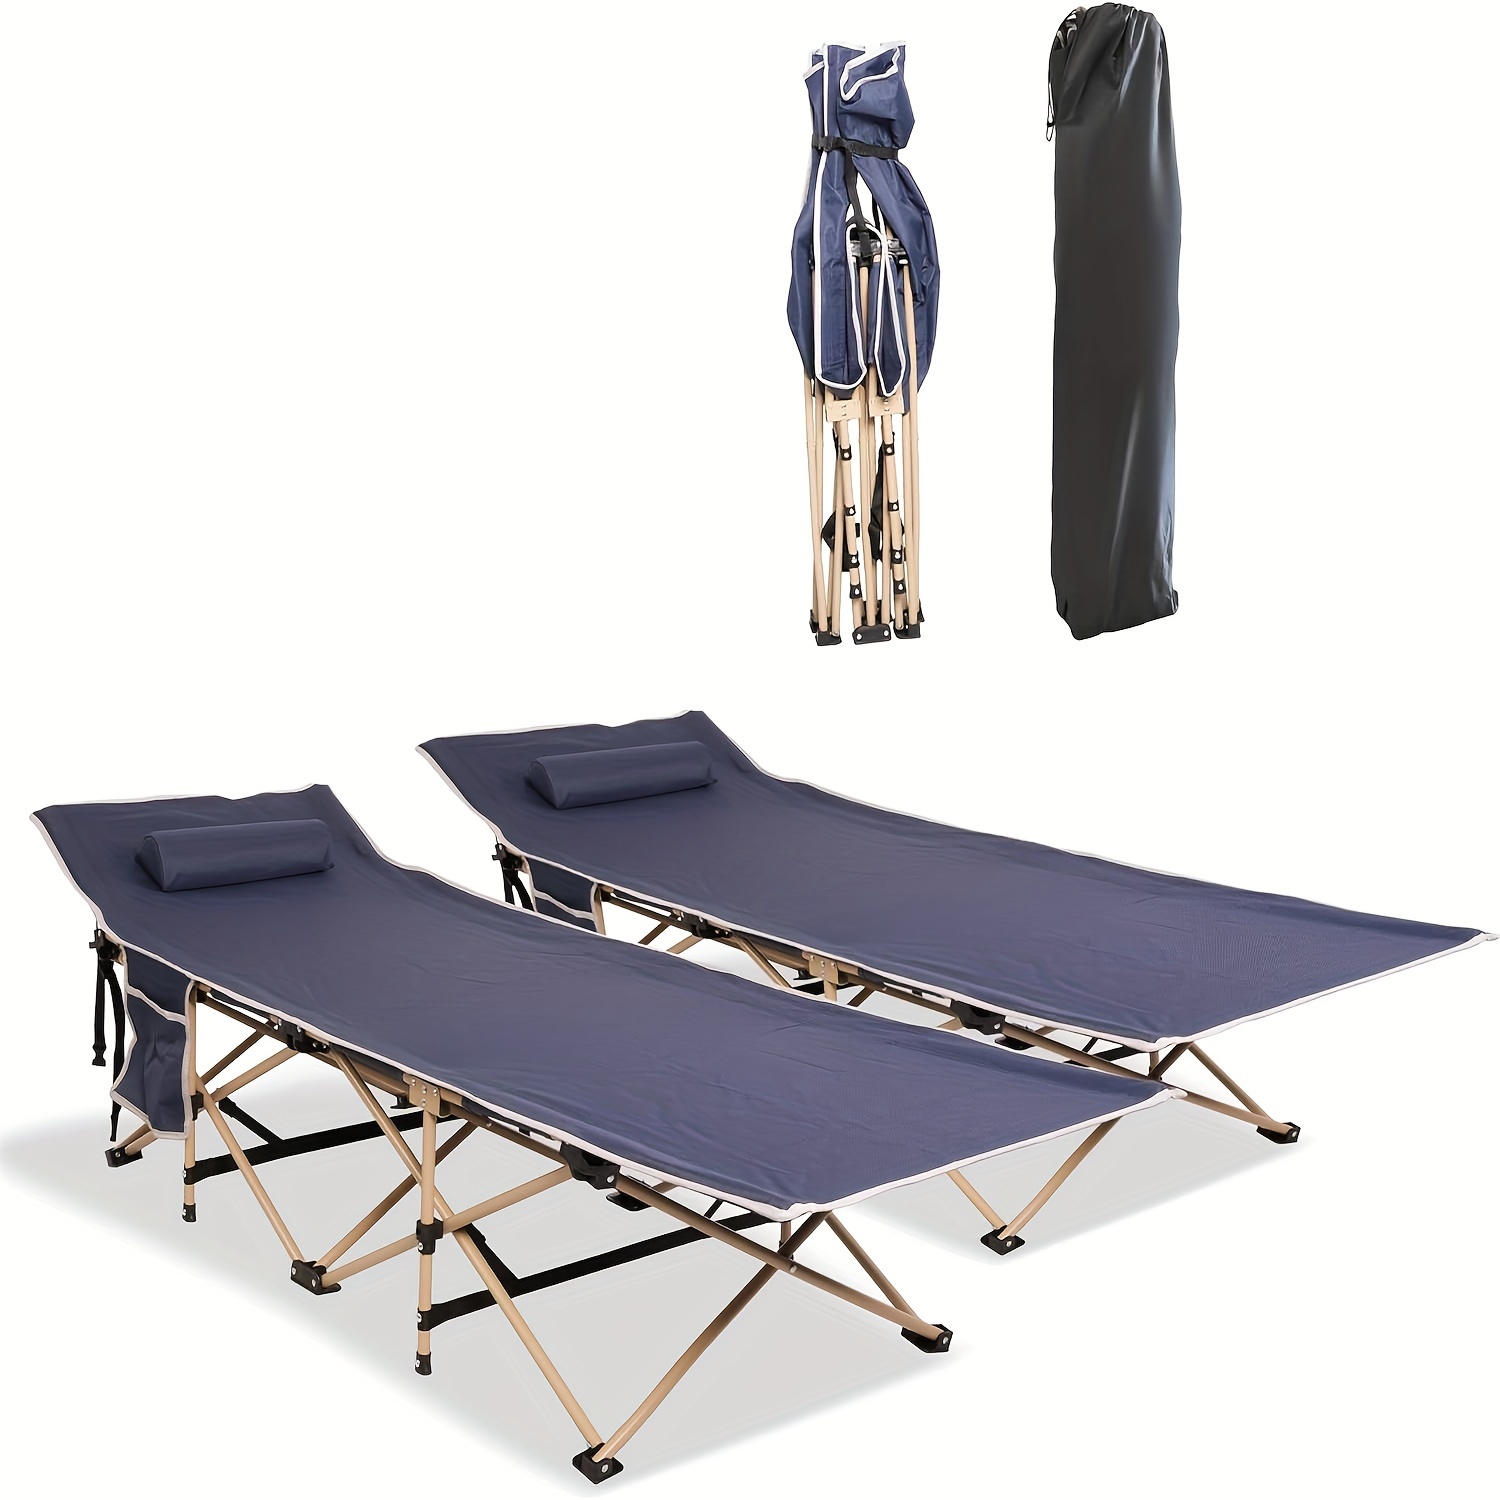 

2 Pack Camping Cot For Adults, Folding Sleeping Cots For Adults With Pillow Side Pocket, Camp Cot Bed With Carry Bag, Portable & Lightweight, Ideal For Camping Traveling Hiking Office Nap